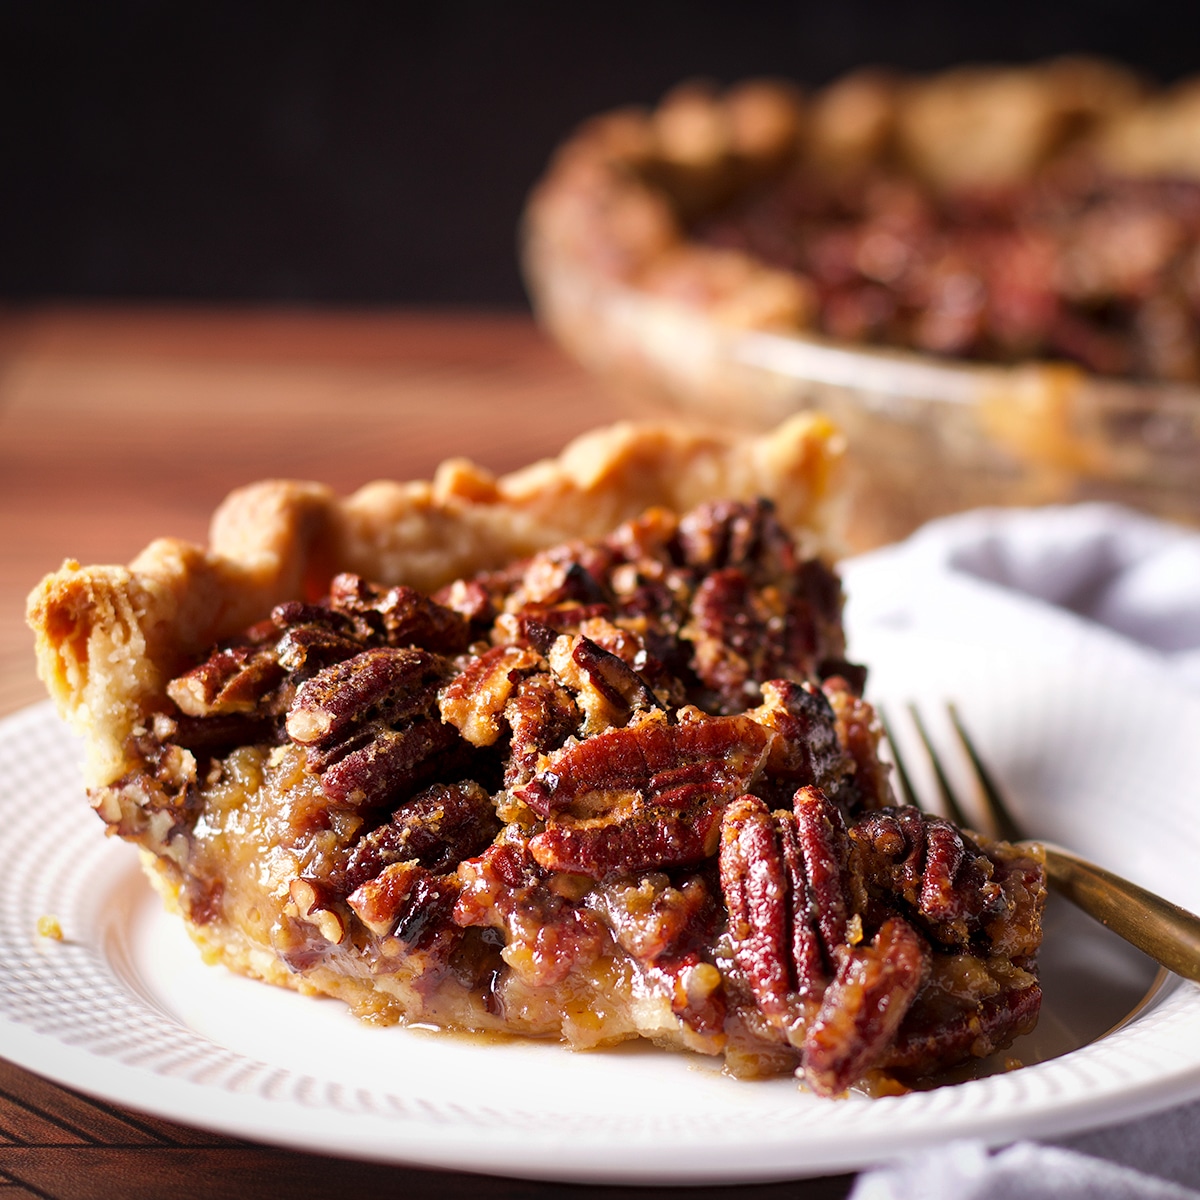 A slice of pecan pie on a white plate with a gold fork resting next to it.